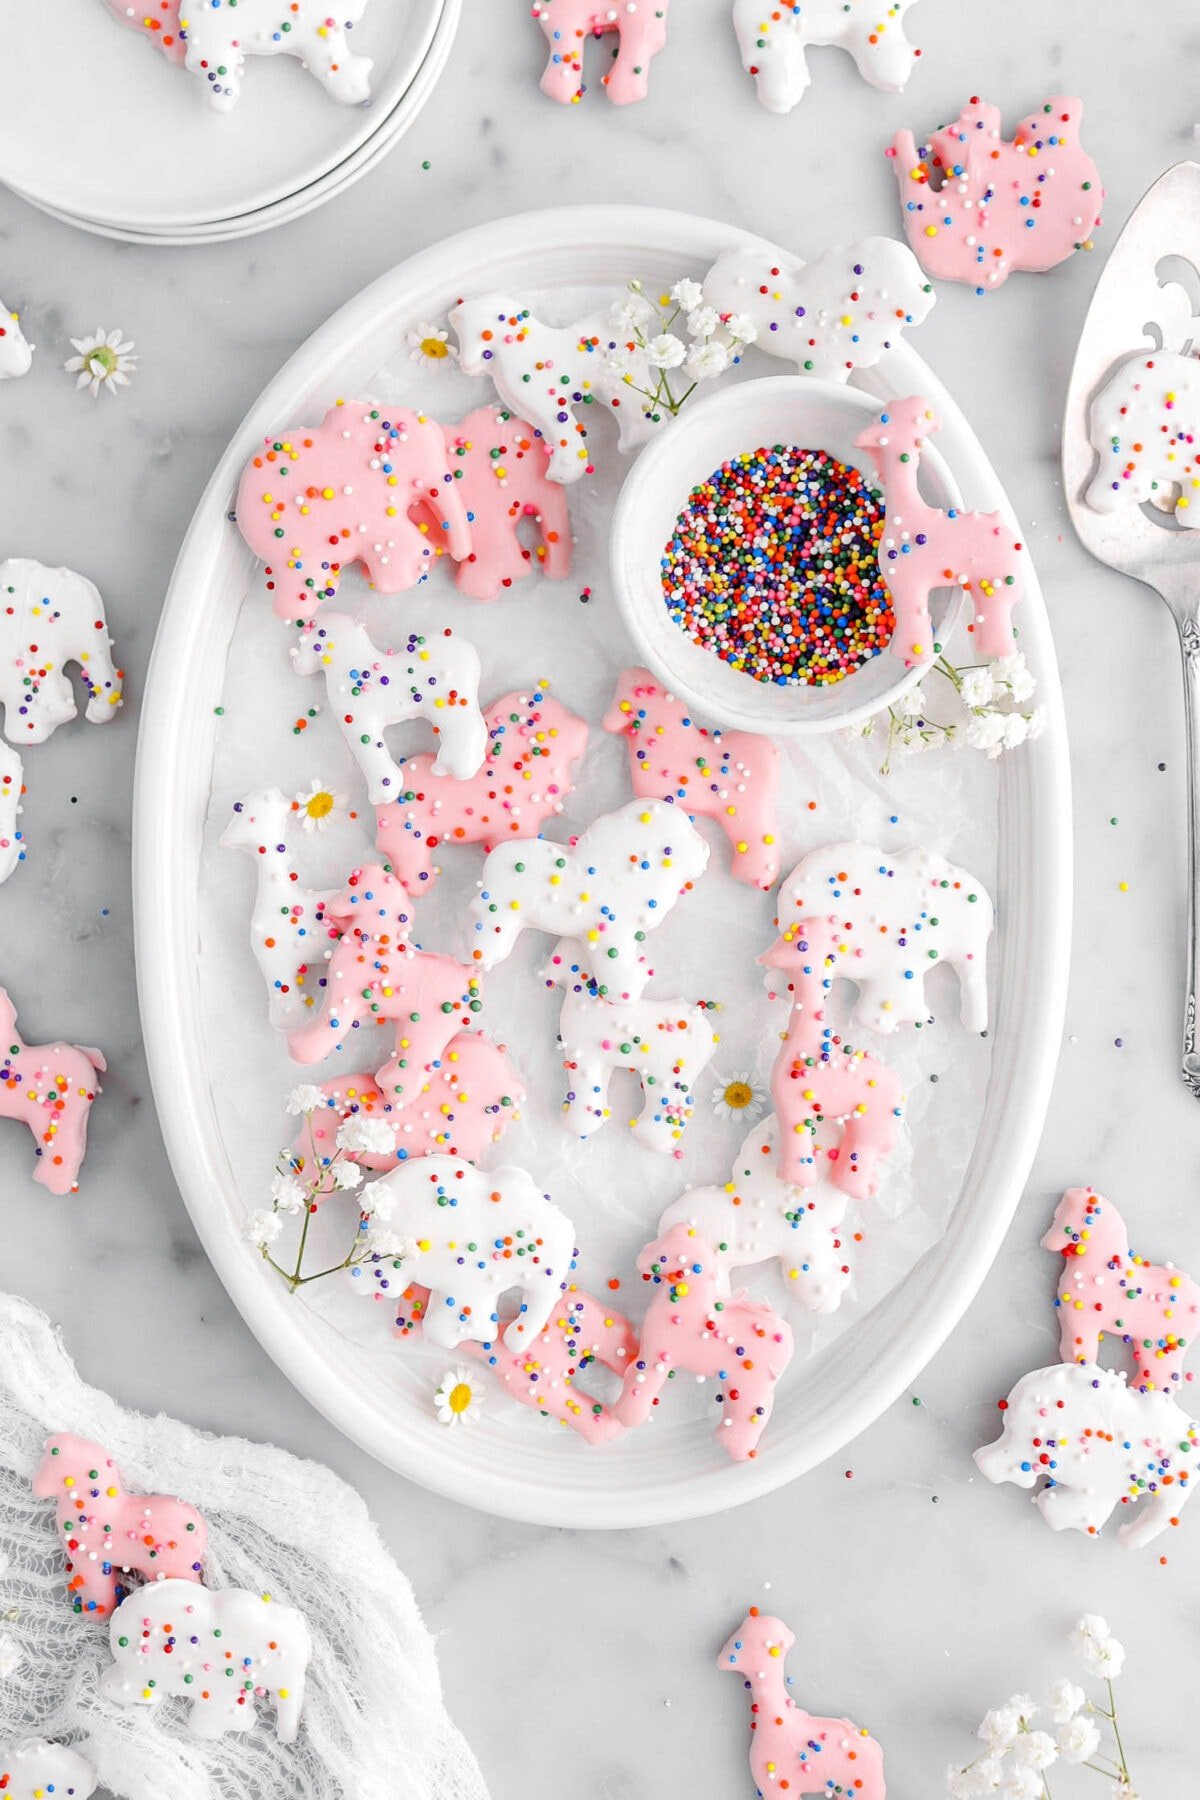 close up overhead shot of frosted animal crackers on white oval plate with flowers and a bowl of sprinkles.